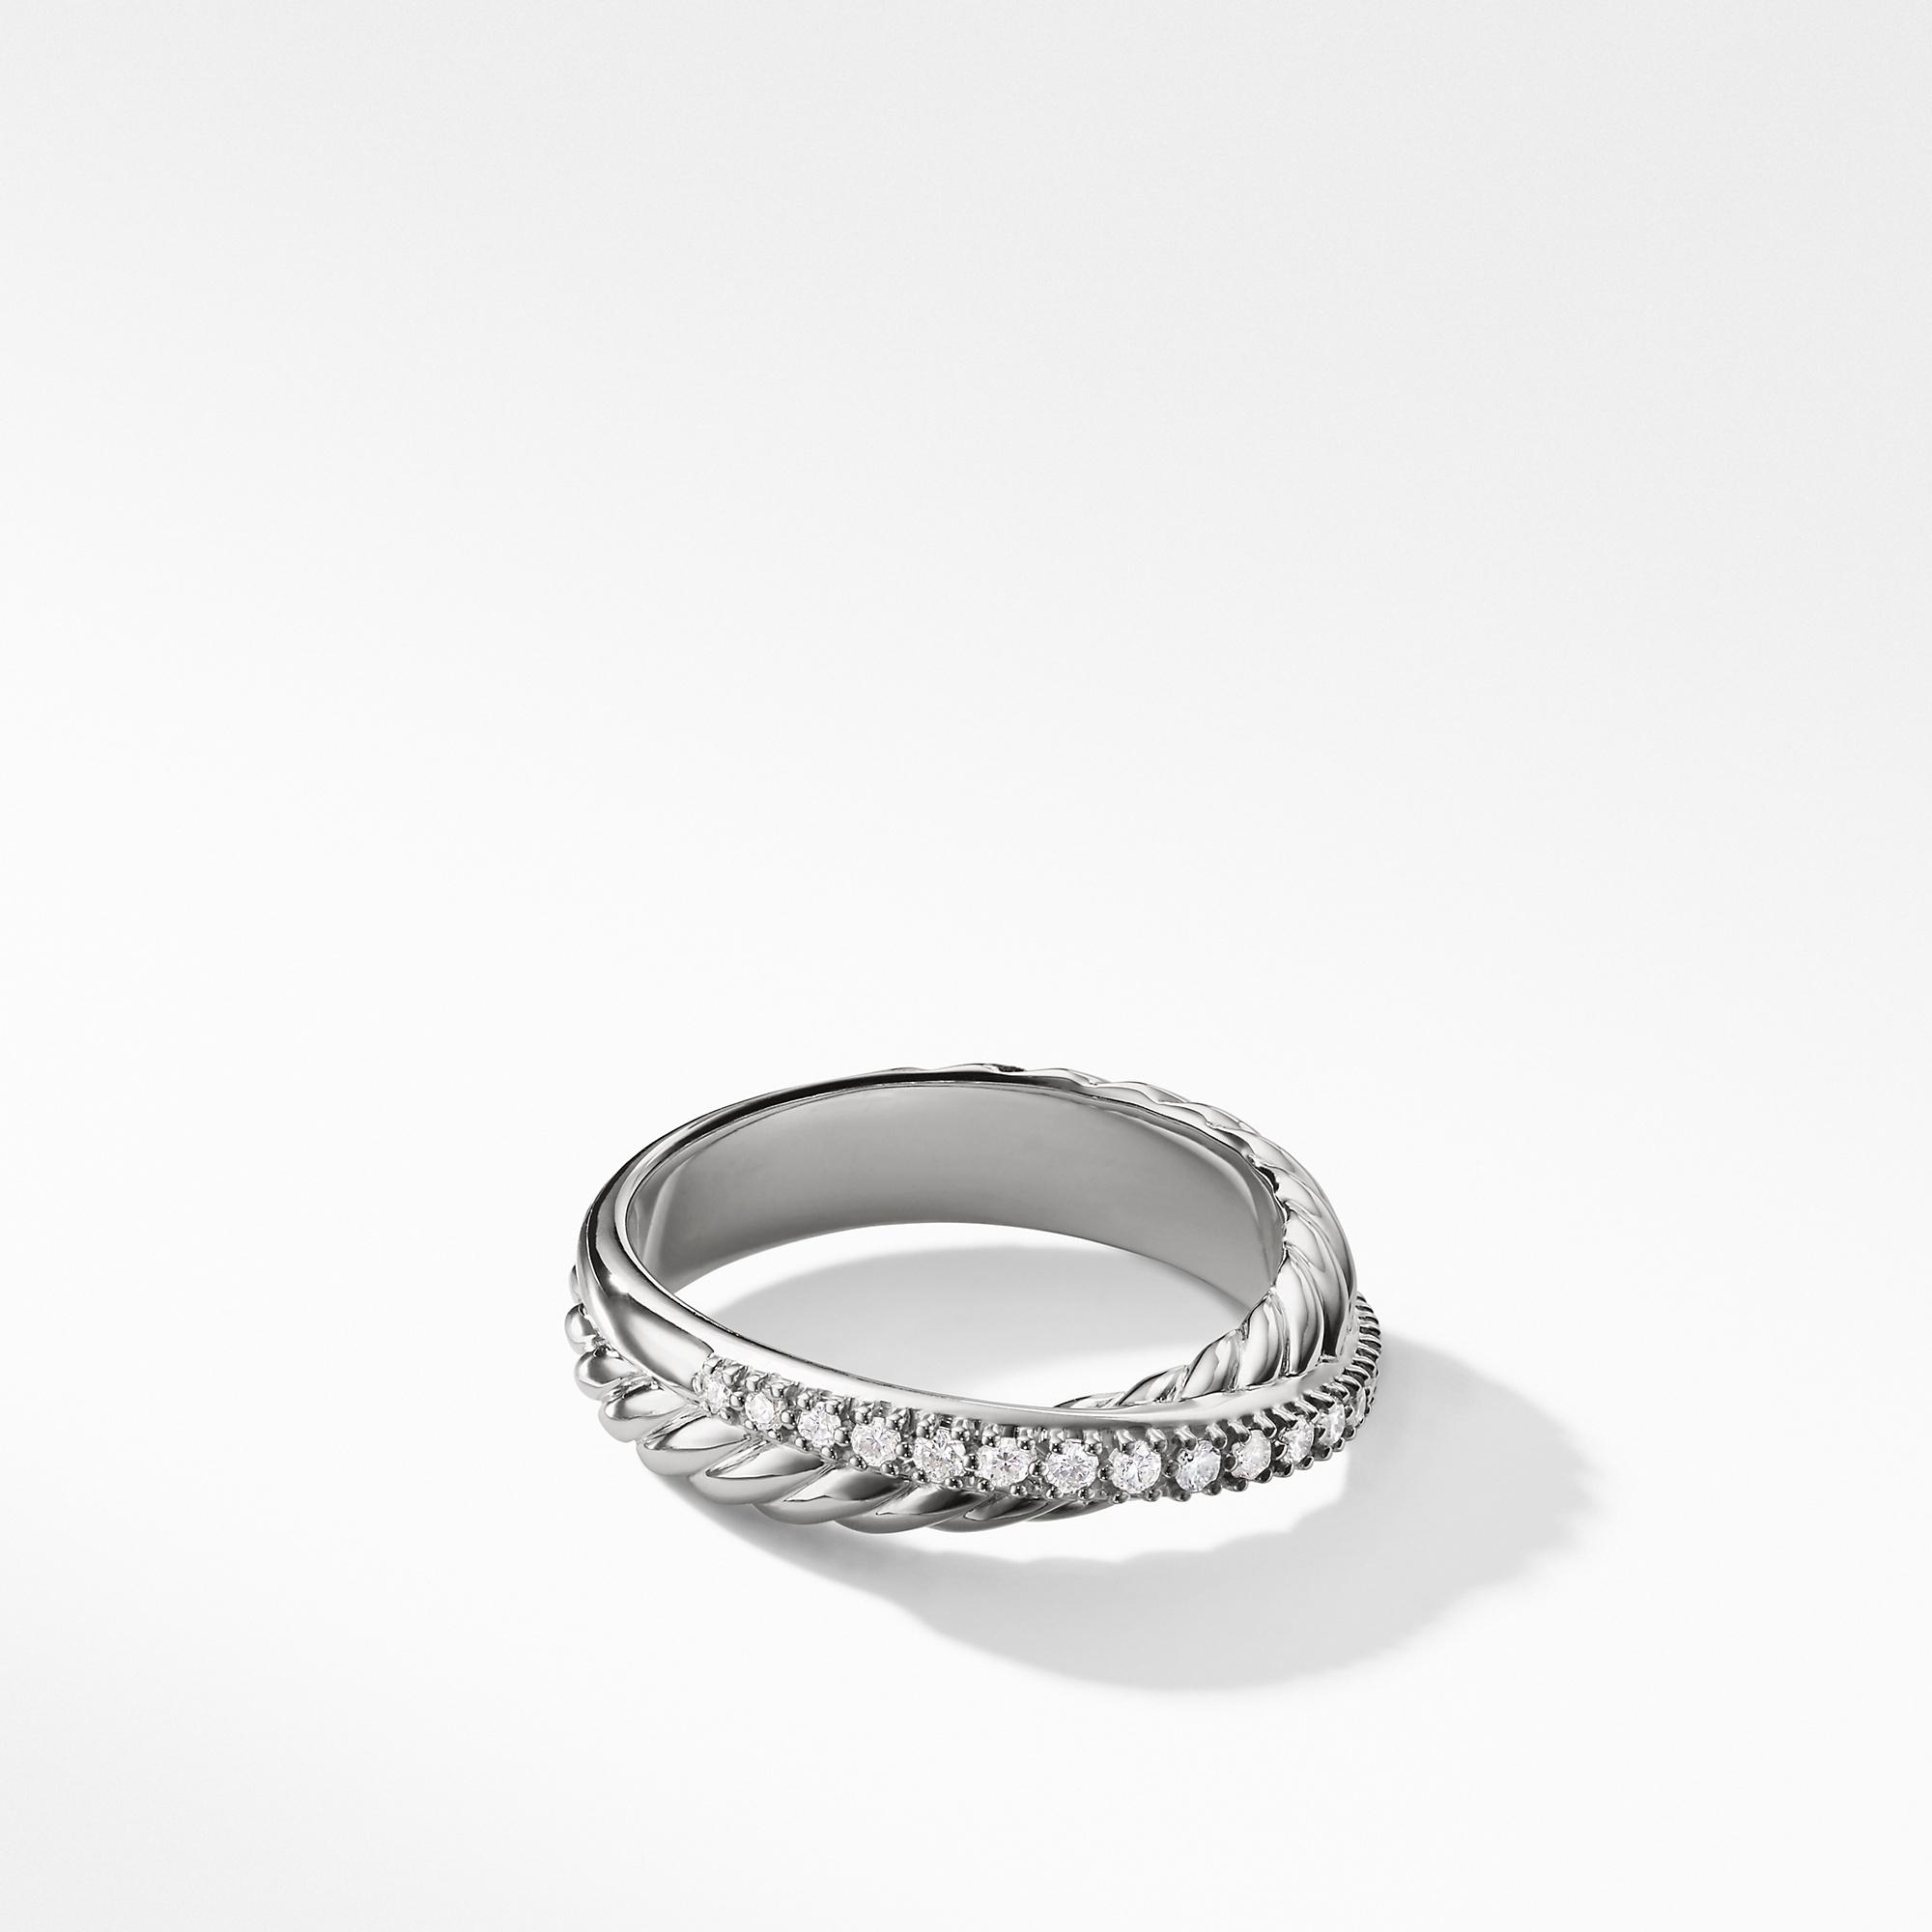 David Yurman Crossover Sterling Silver Ring with Diamonds, size 7